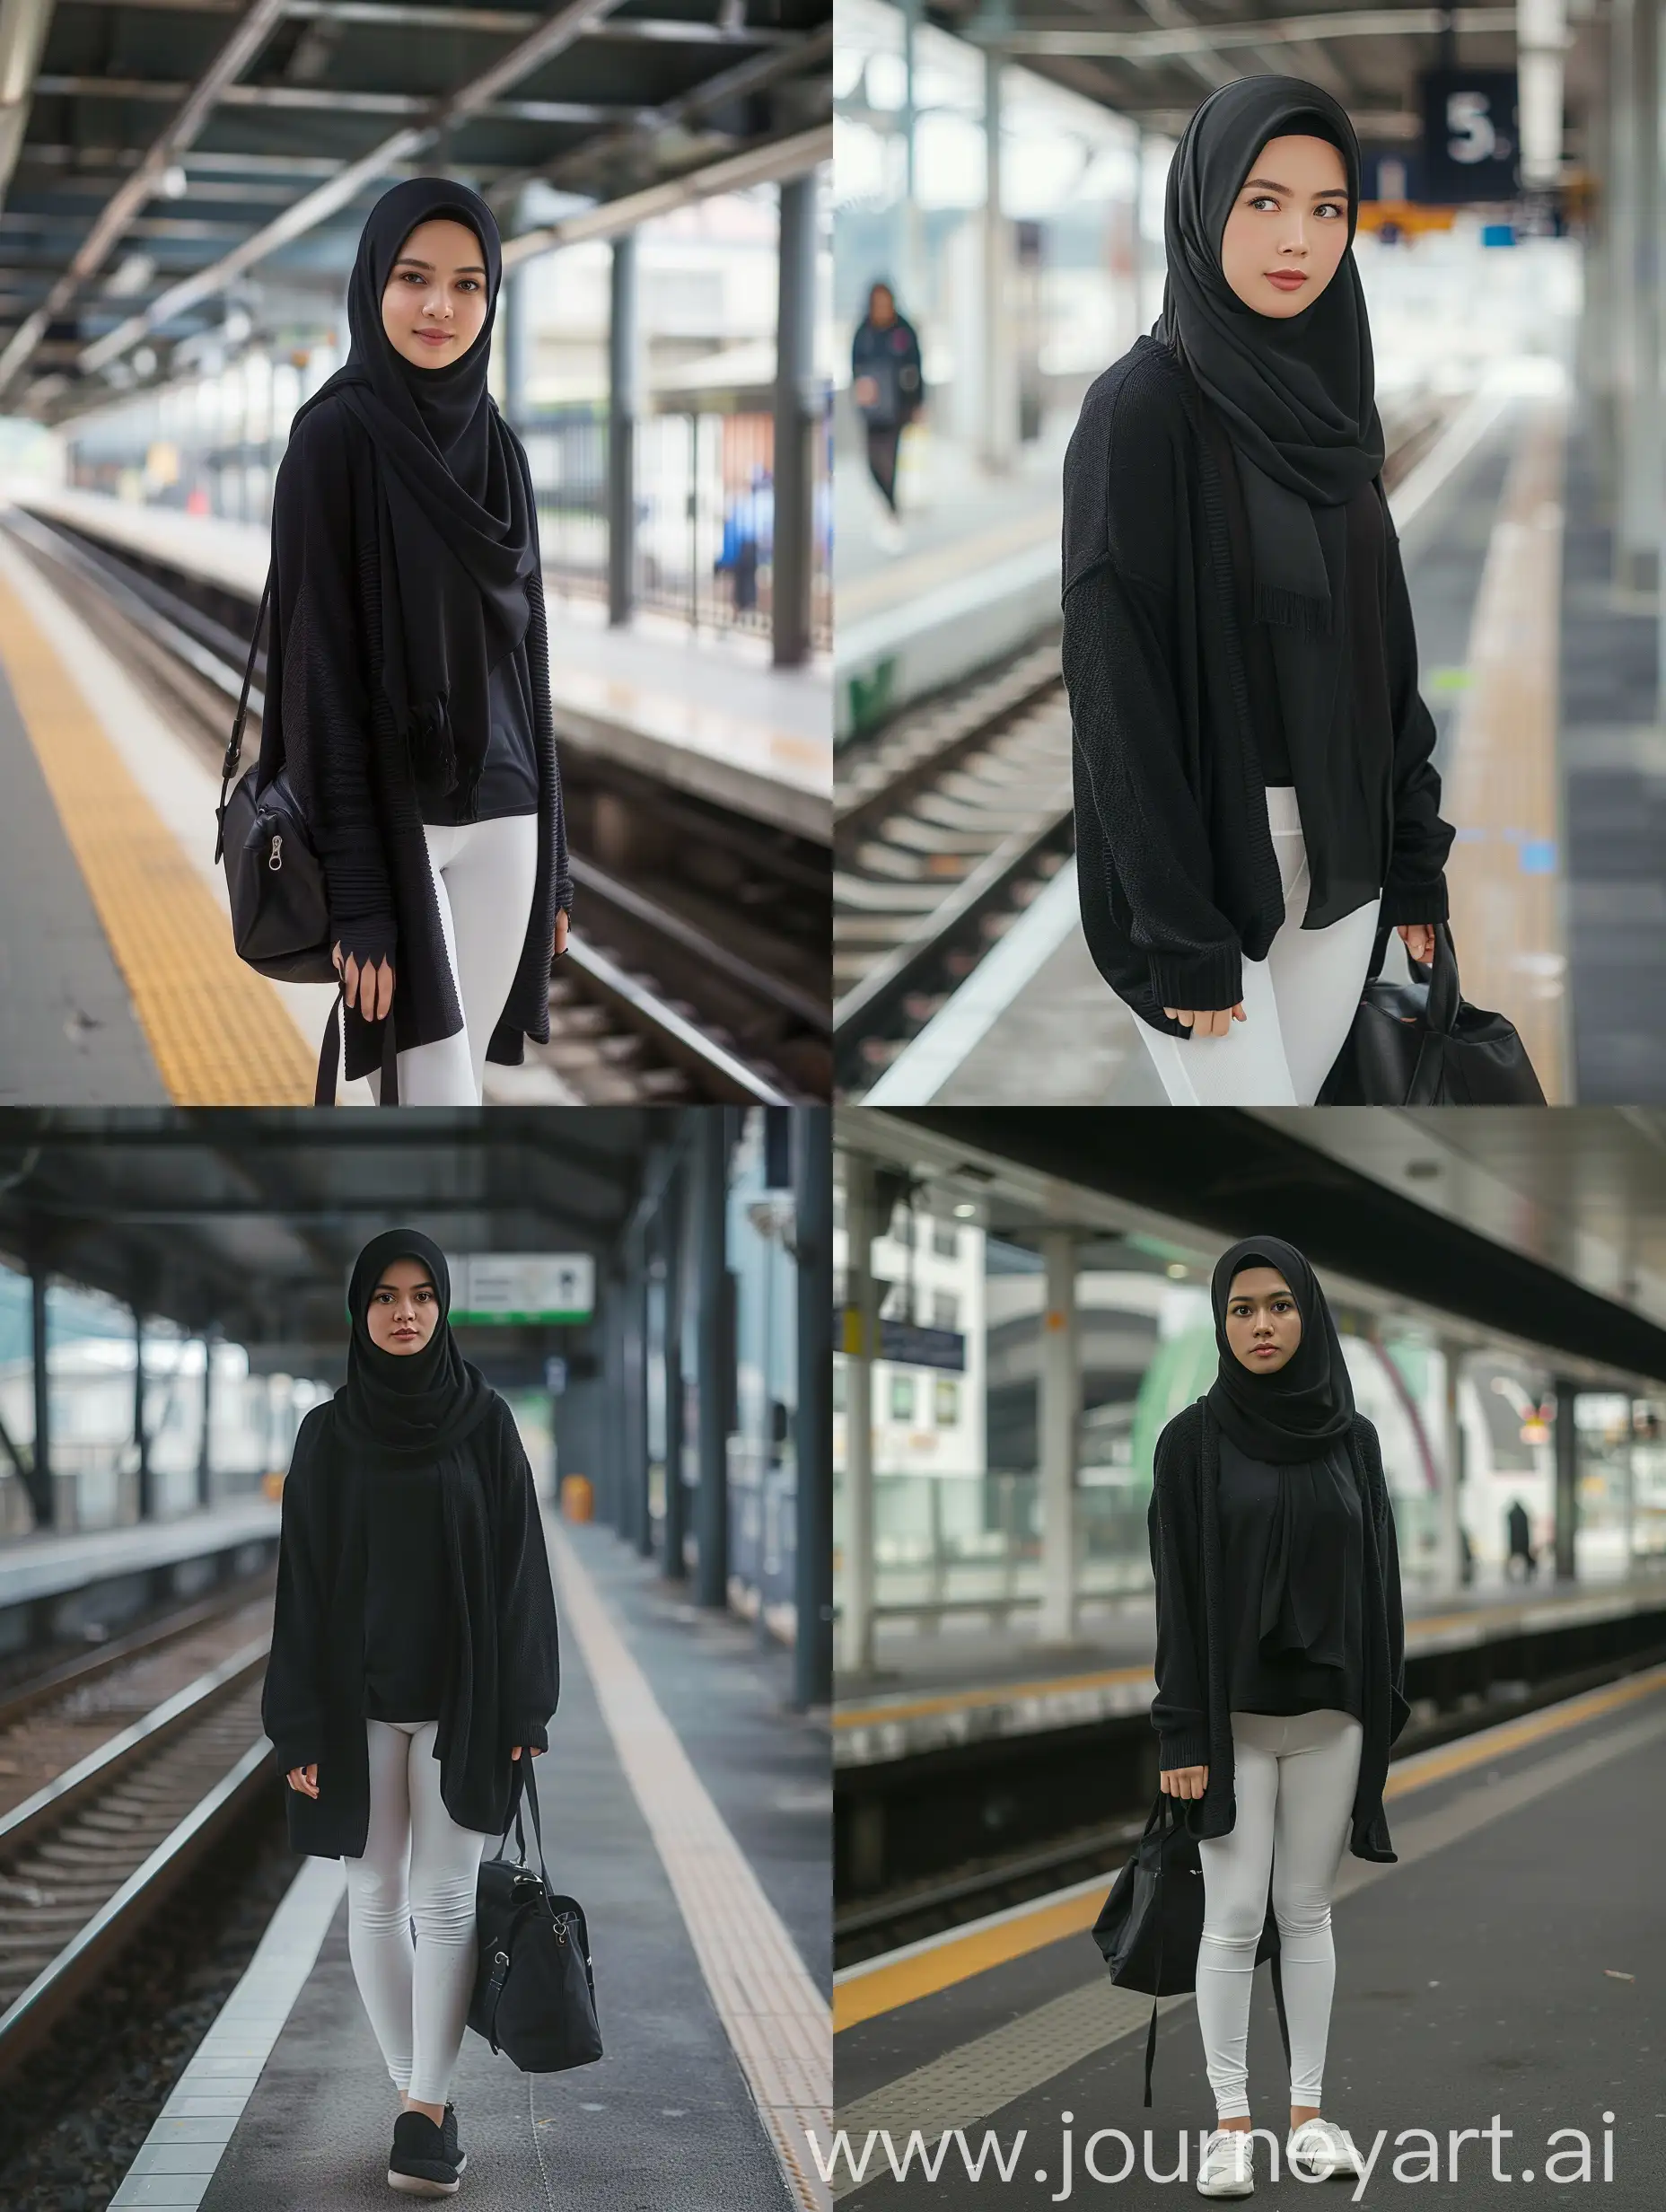 Portrait-of-Indonesian-Woman-in-Hijab-at-Train-Station